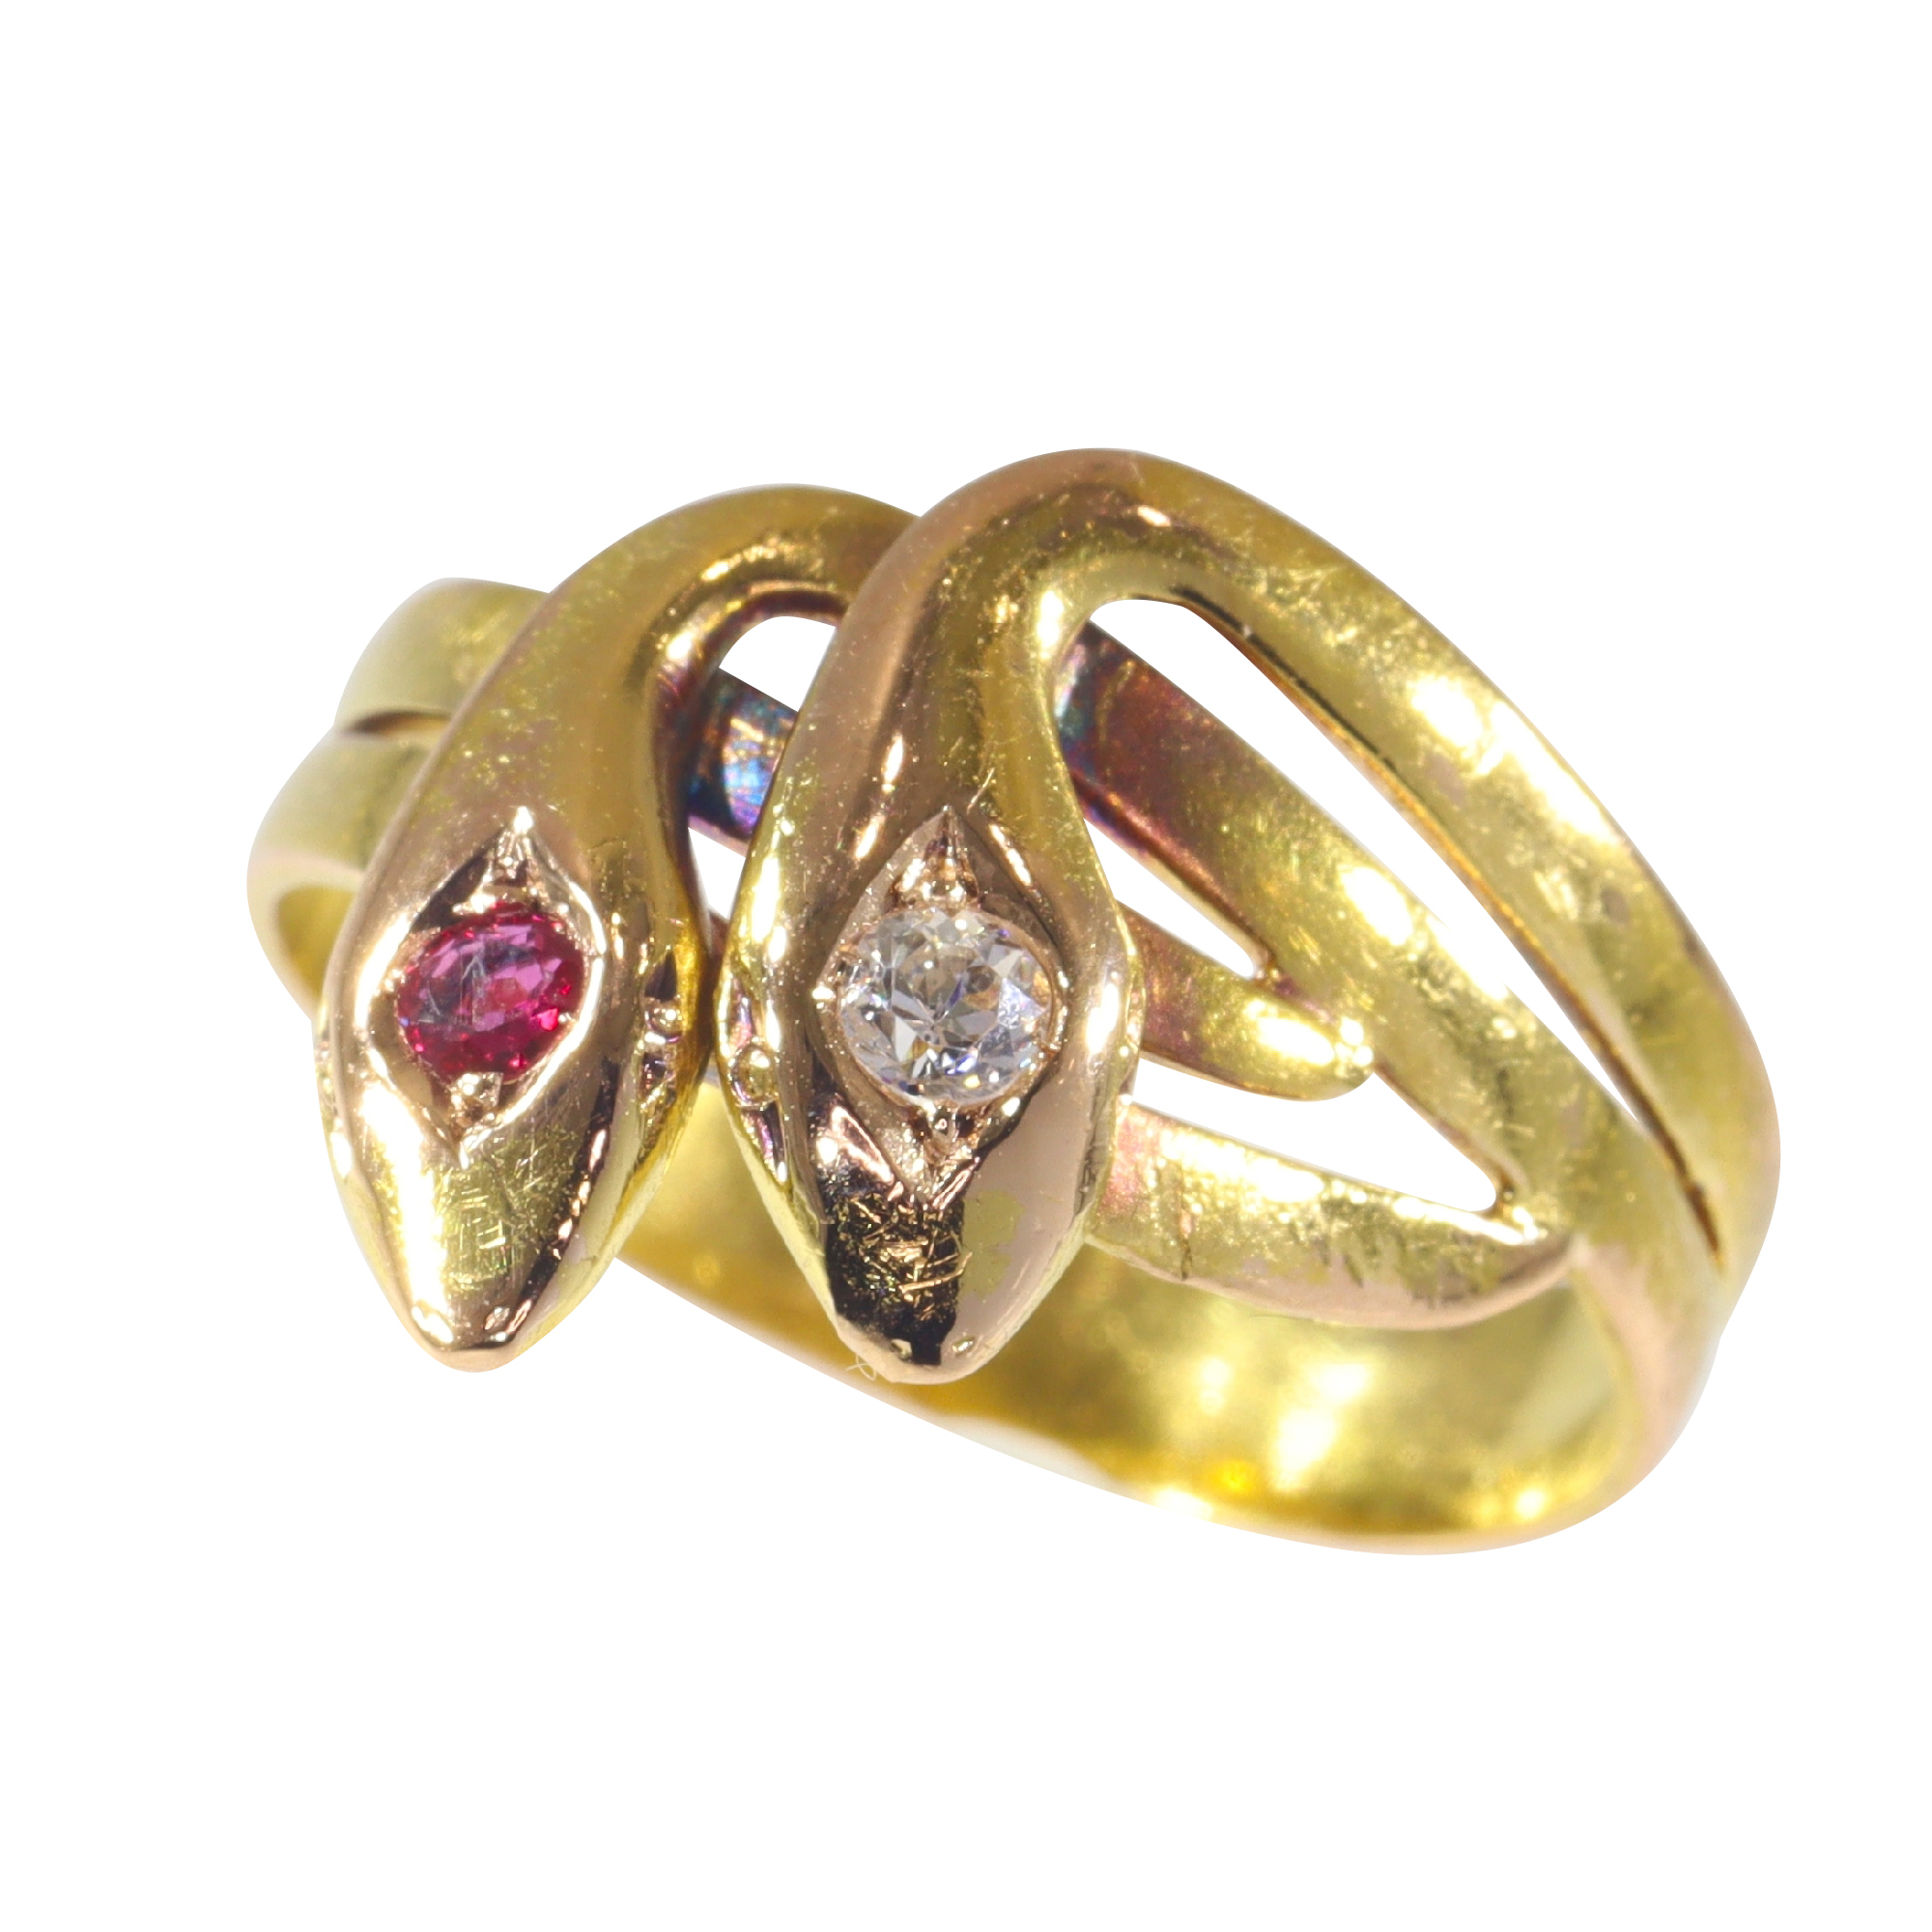 Vintage antique 18K gold double snake ring with diamond and ruby